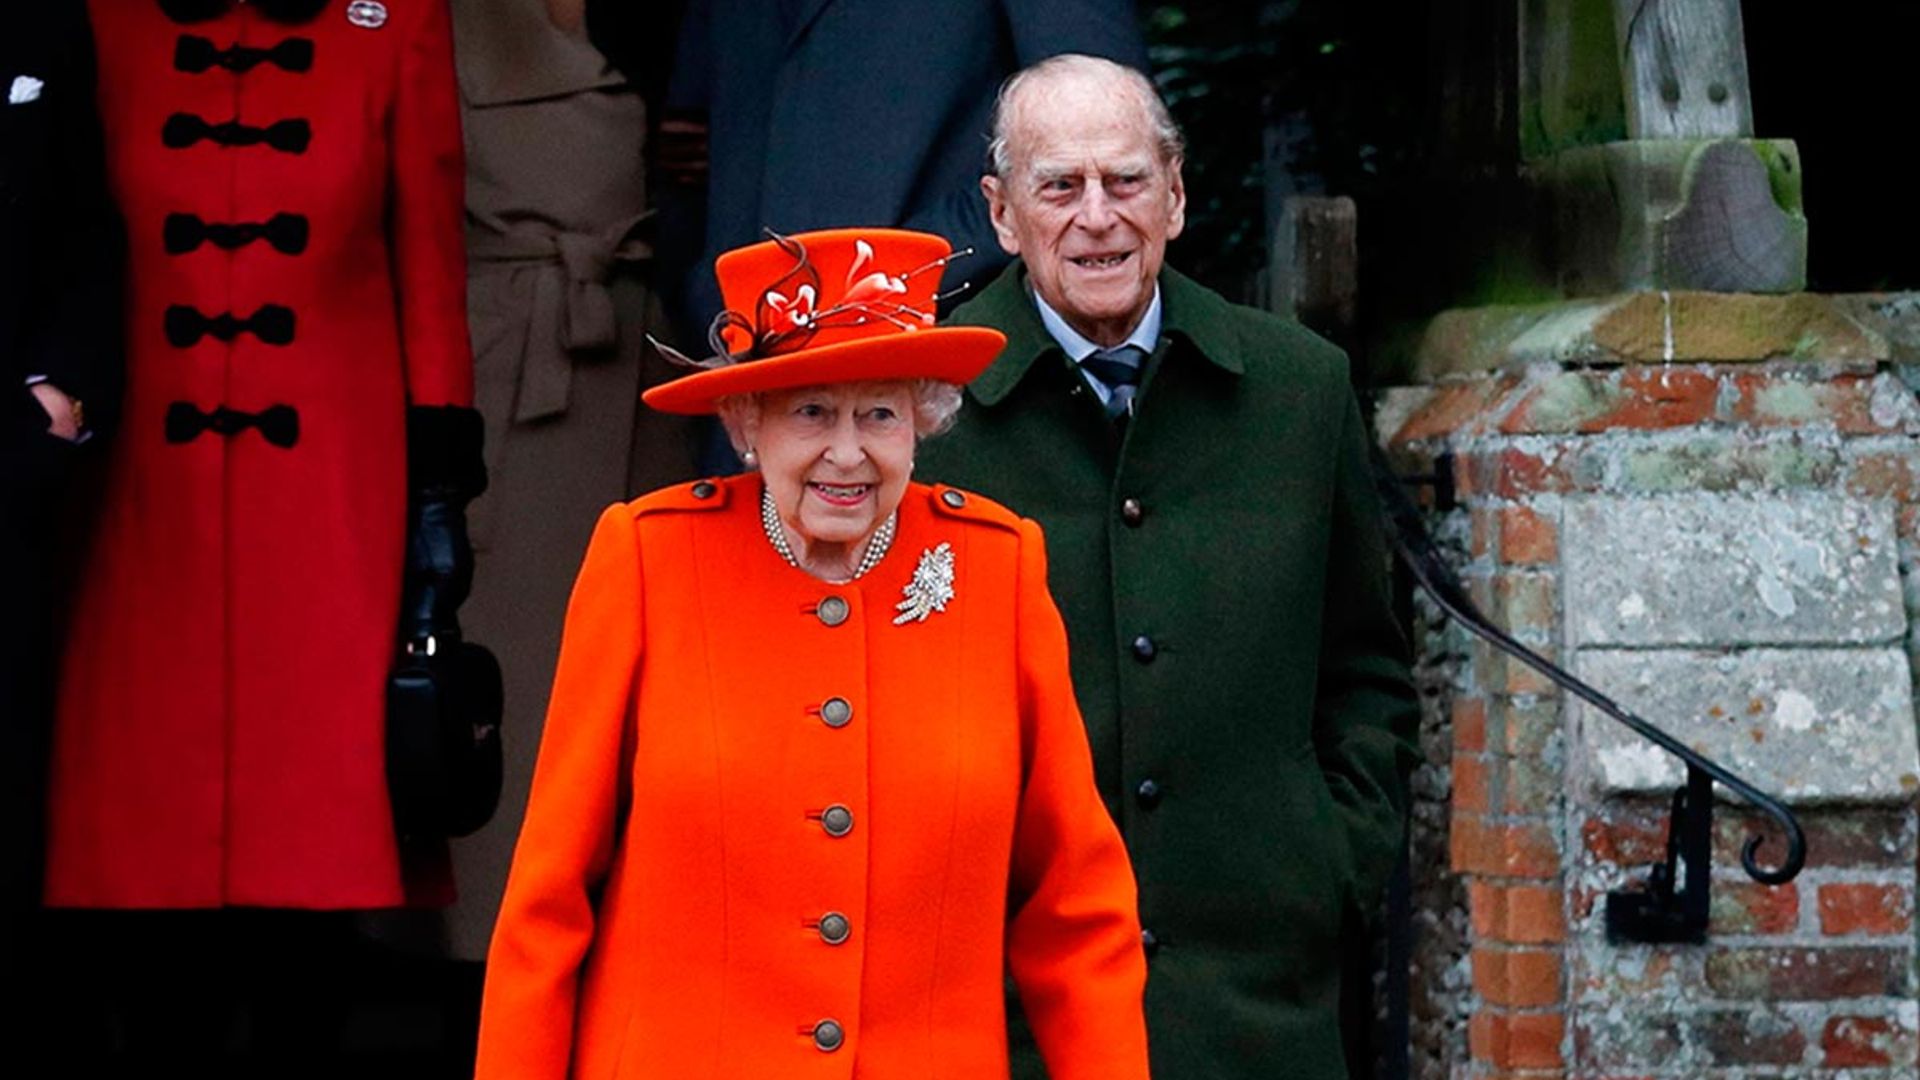 The Queen and Prince Philip's unexpected change in Christmas location